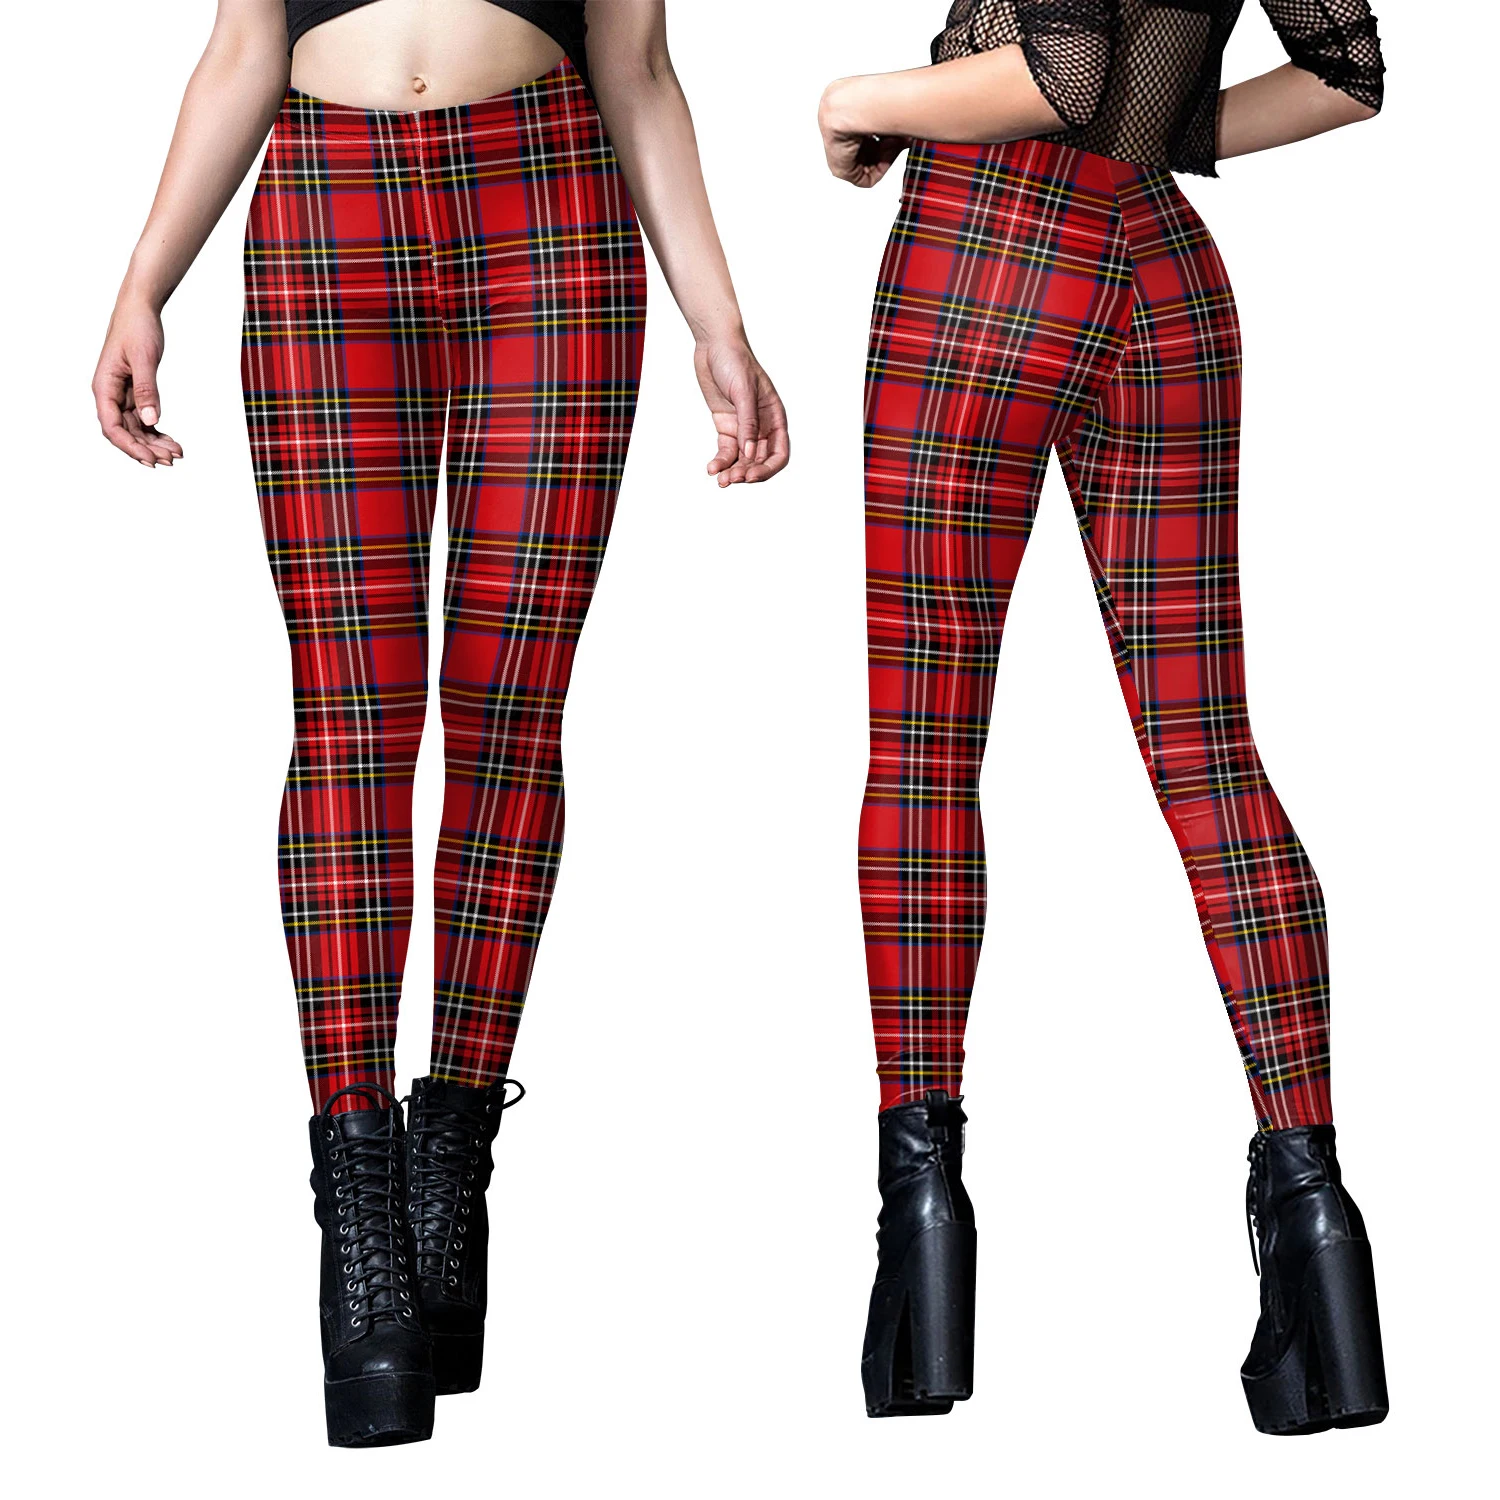 Happy Christmas Red Striped Plaid Print Women Leggings Sexy Soft Elasticity Pants Fitness Workout Xmas Party Leggings